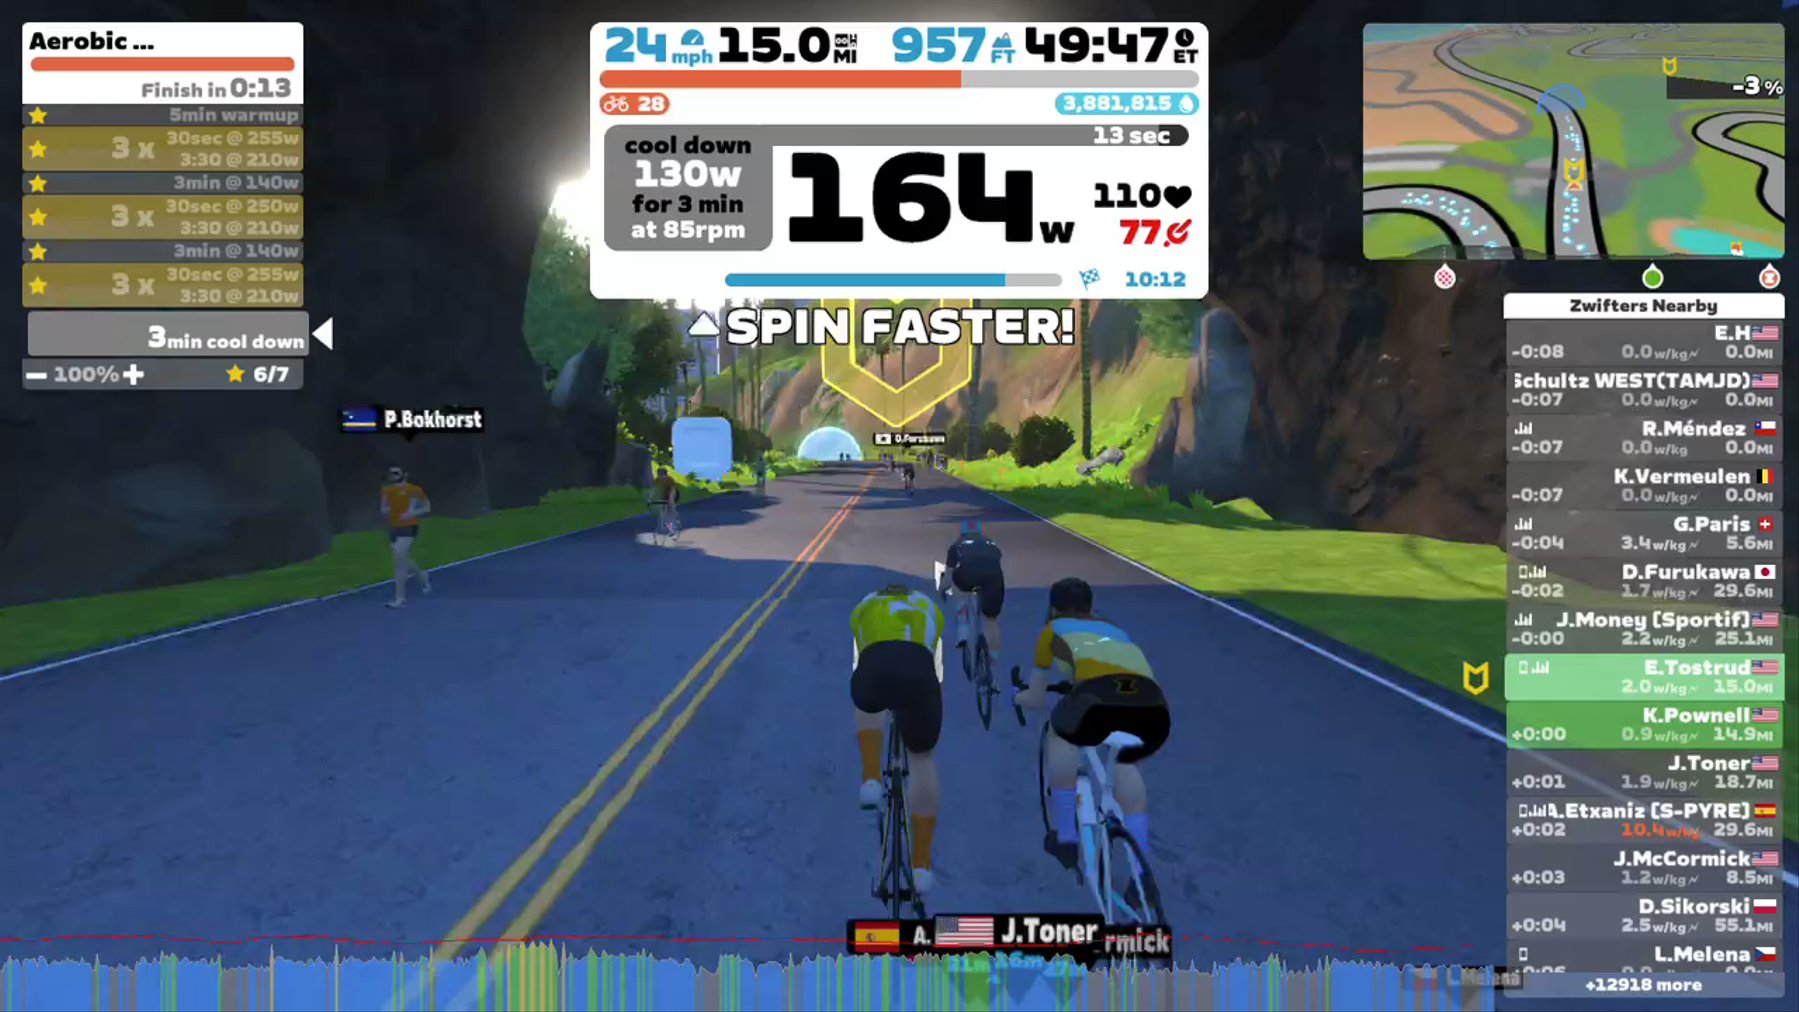 Zwift - Eric Tostrud's Meetup on Downtown Titans in Watopia